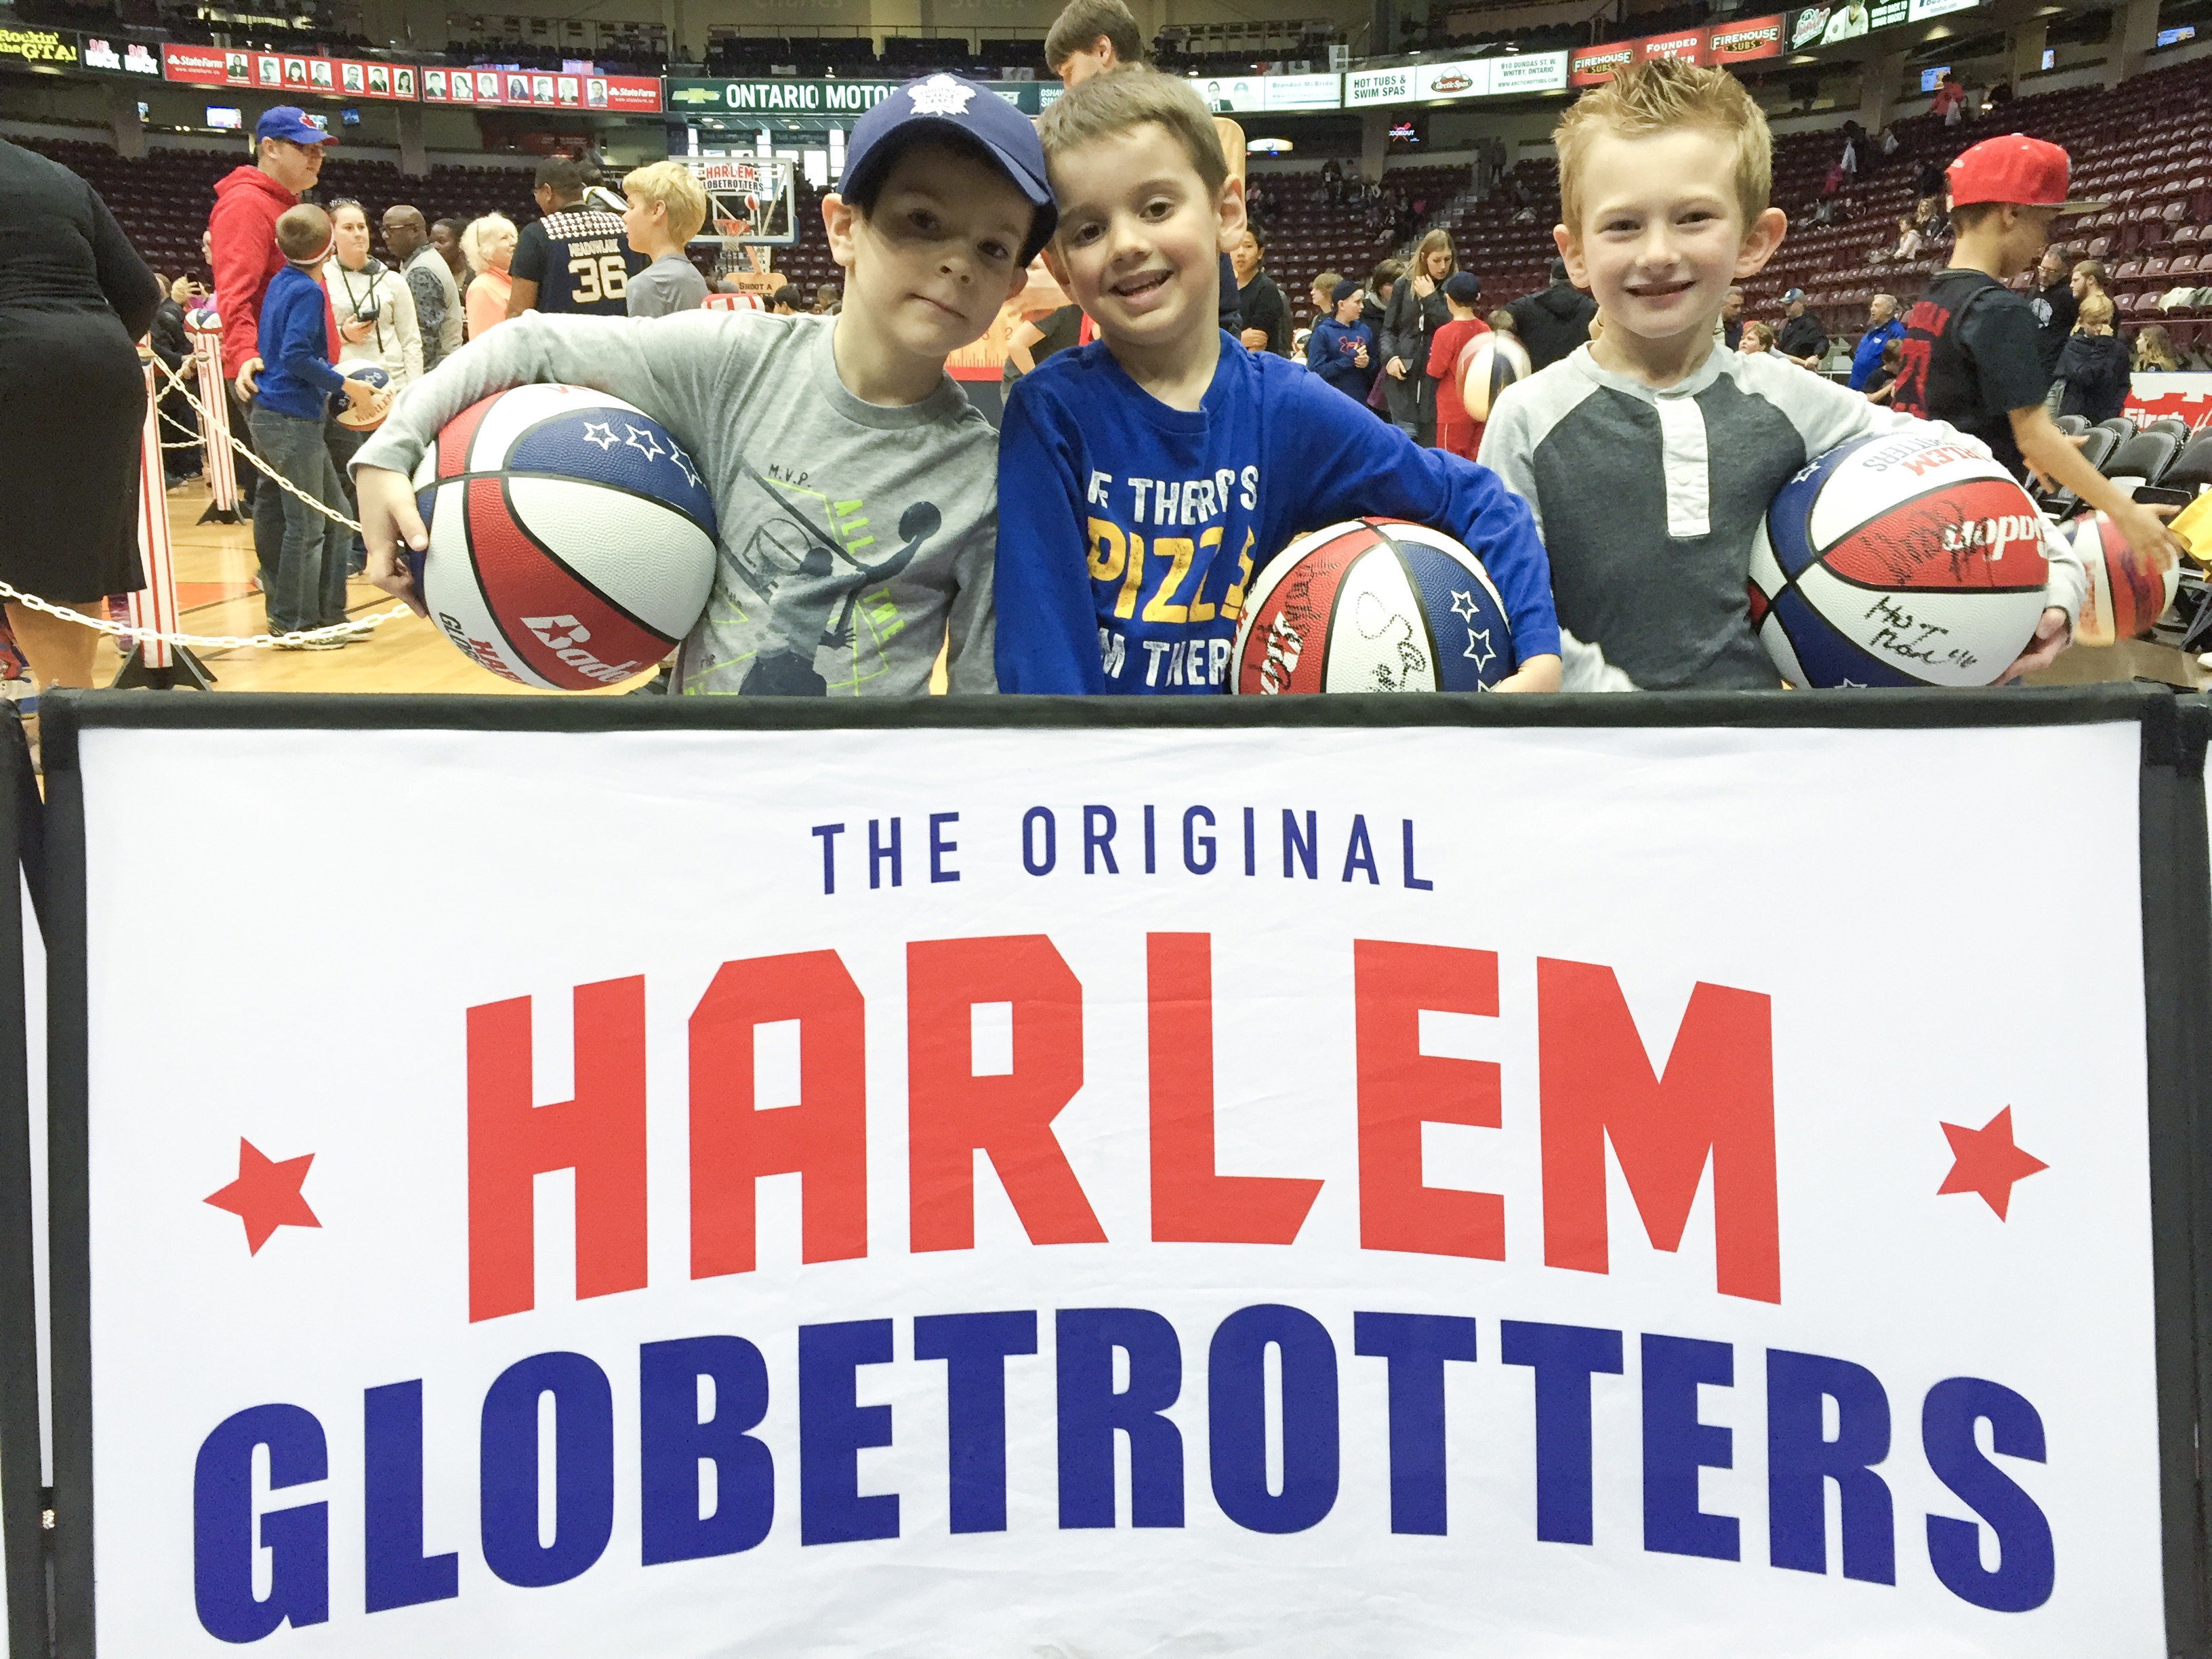 Our Night at the Harlem Globetrotters Game!